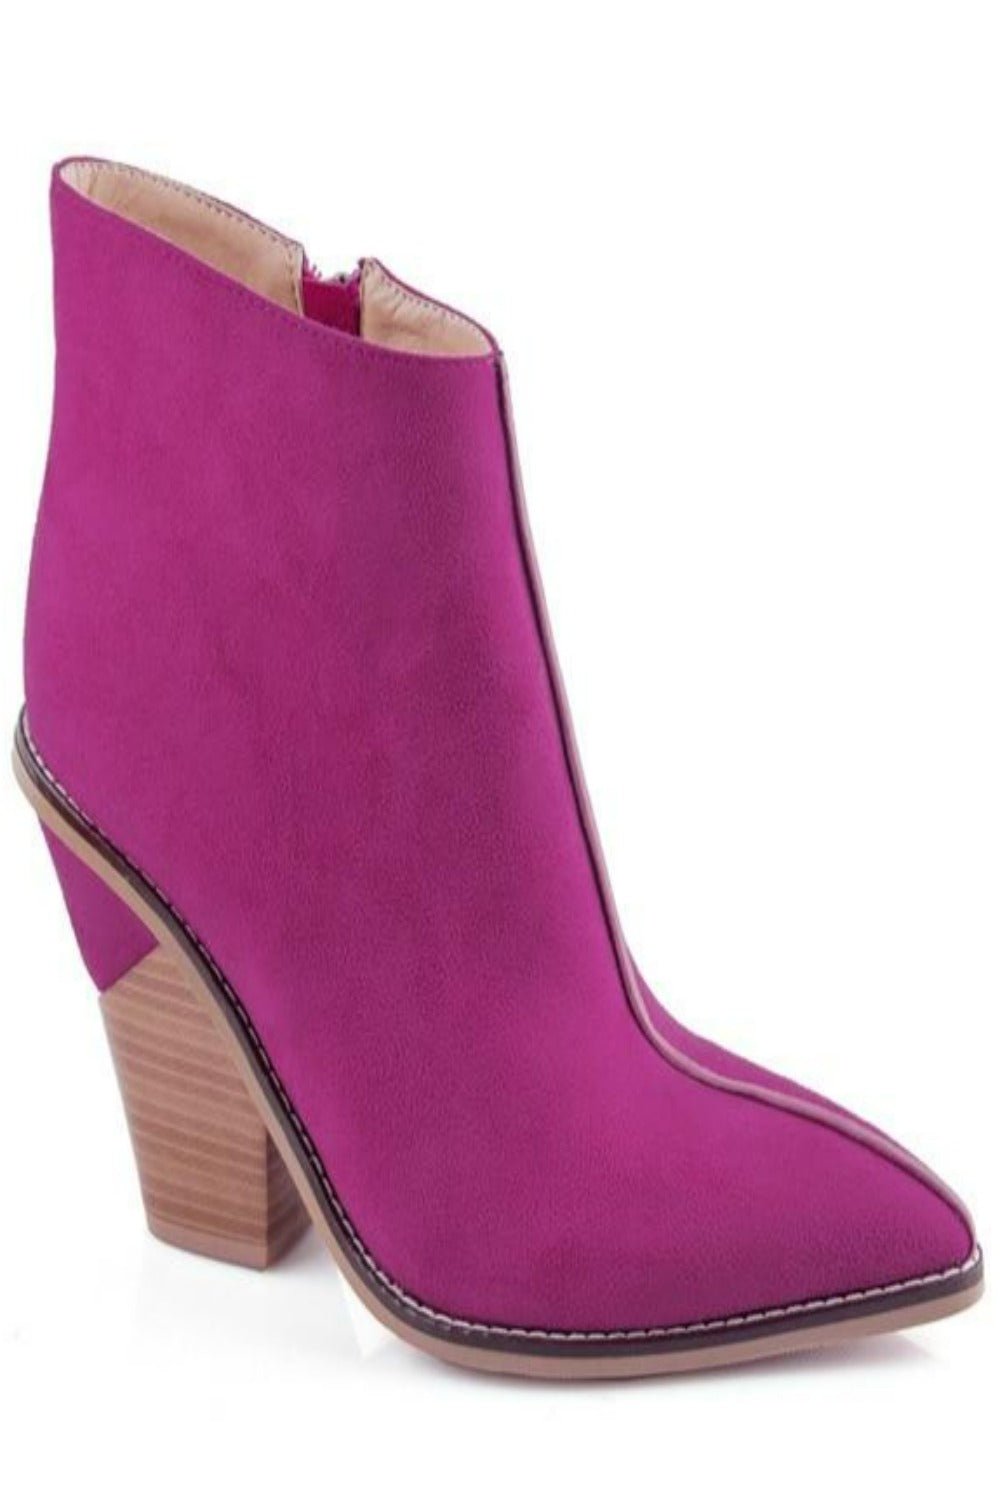 Thick High Heels Pointed Toe Western Cowboy Ankle Boots - TGC Boutique - Ankle Booties